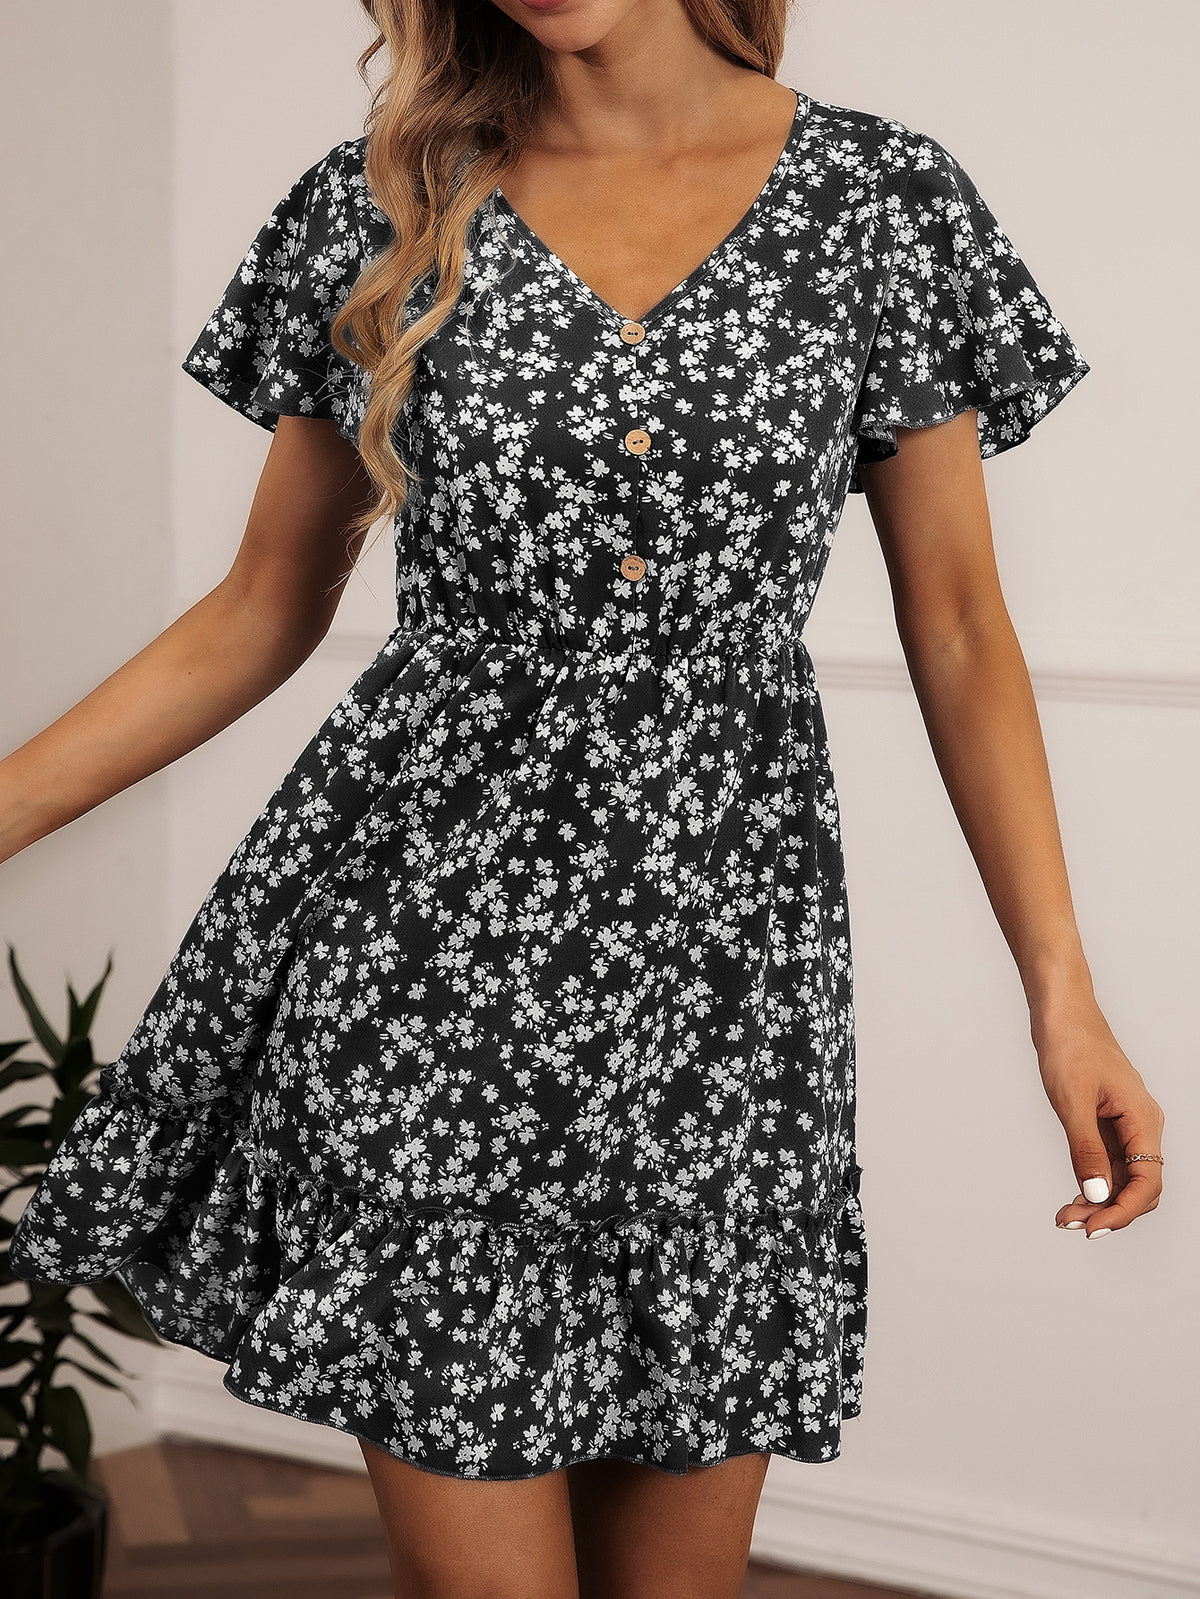 Floral Print Dress with Ruffle - Black and White / XL